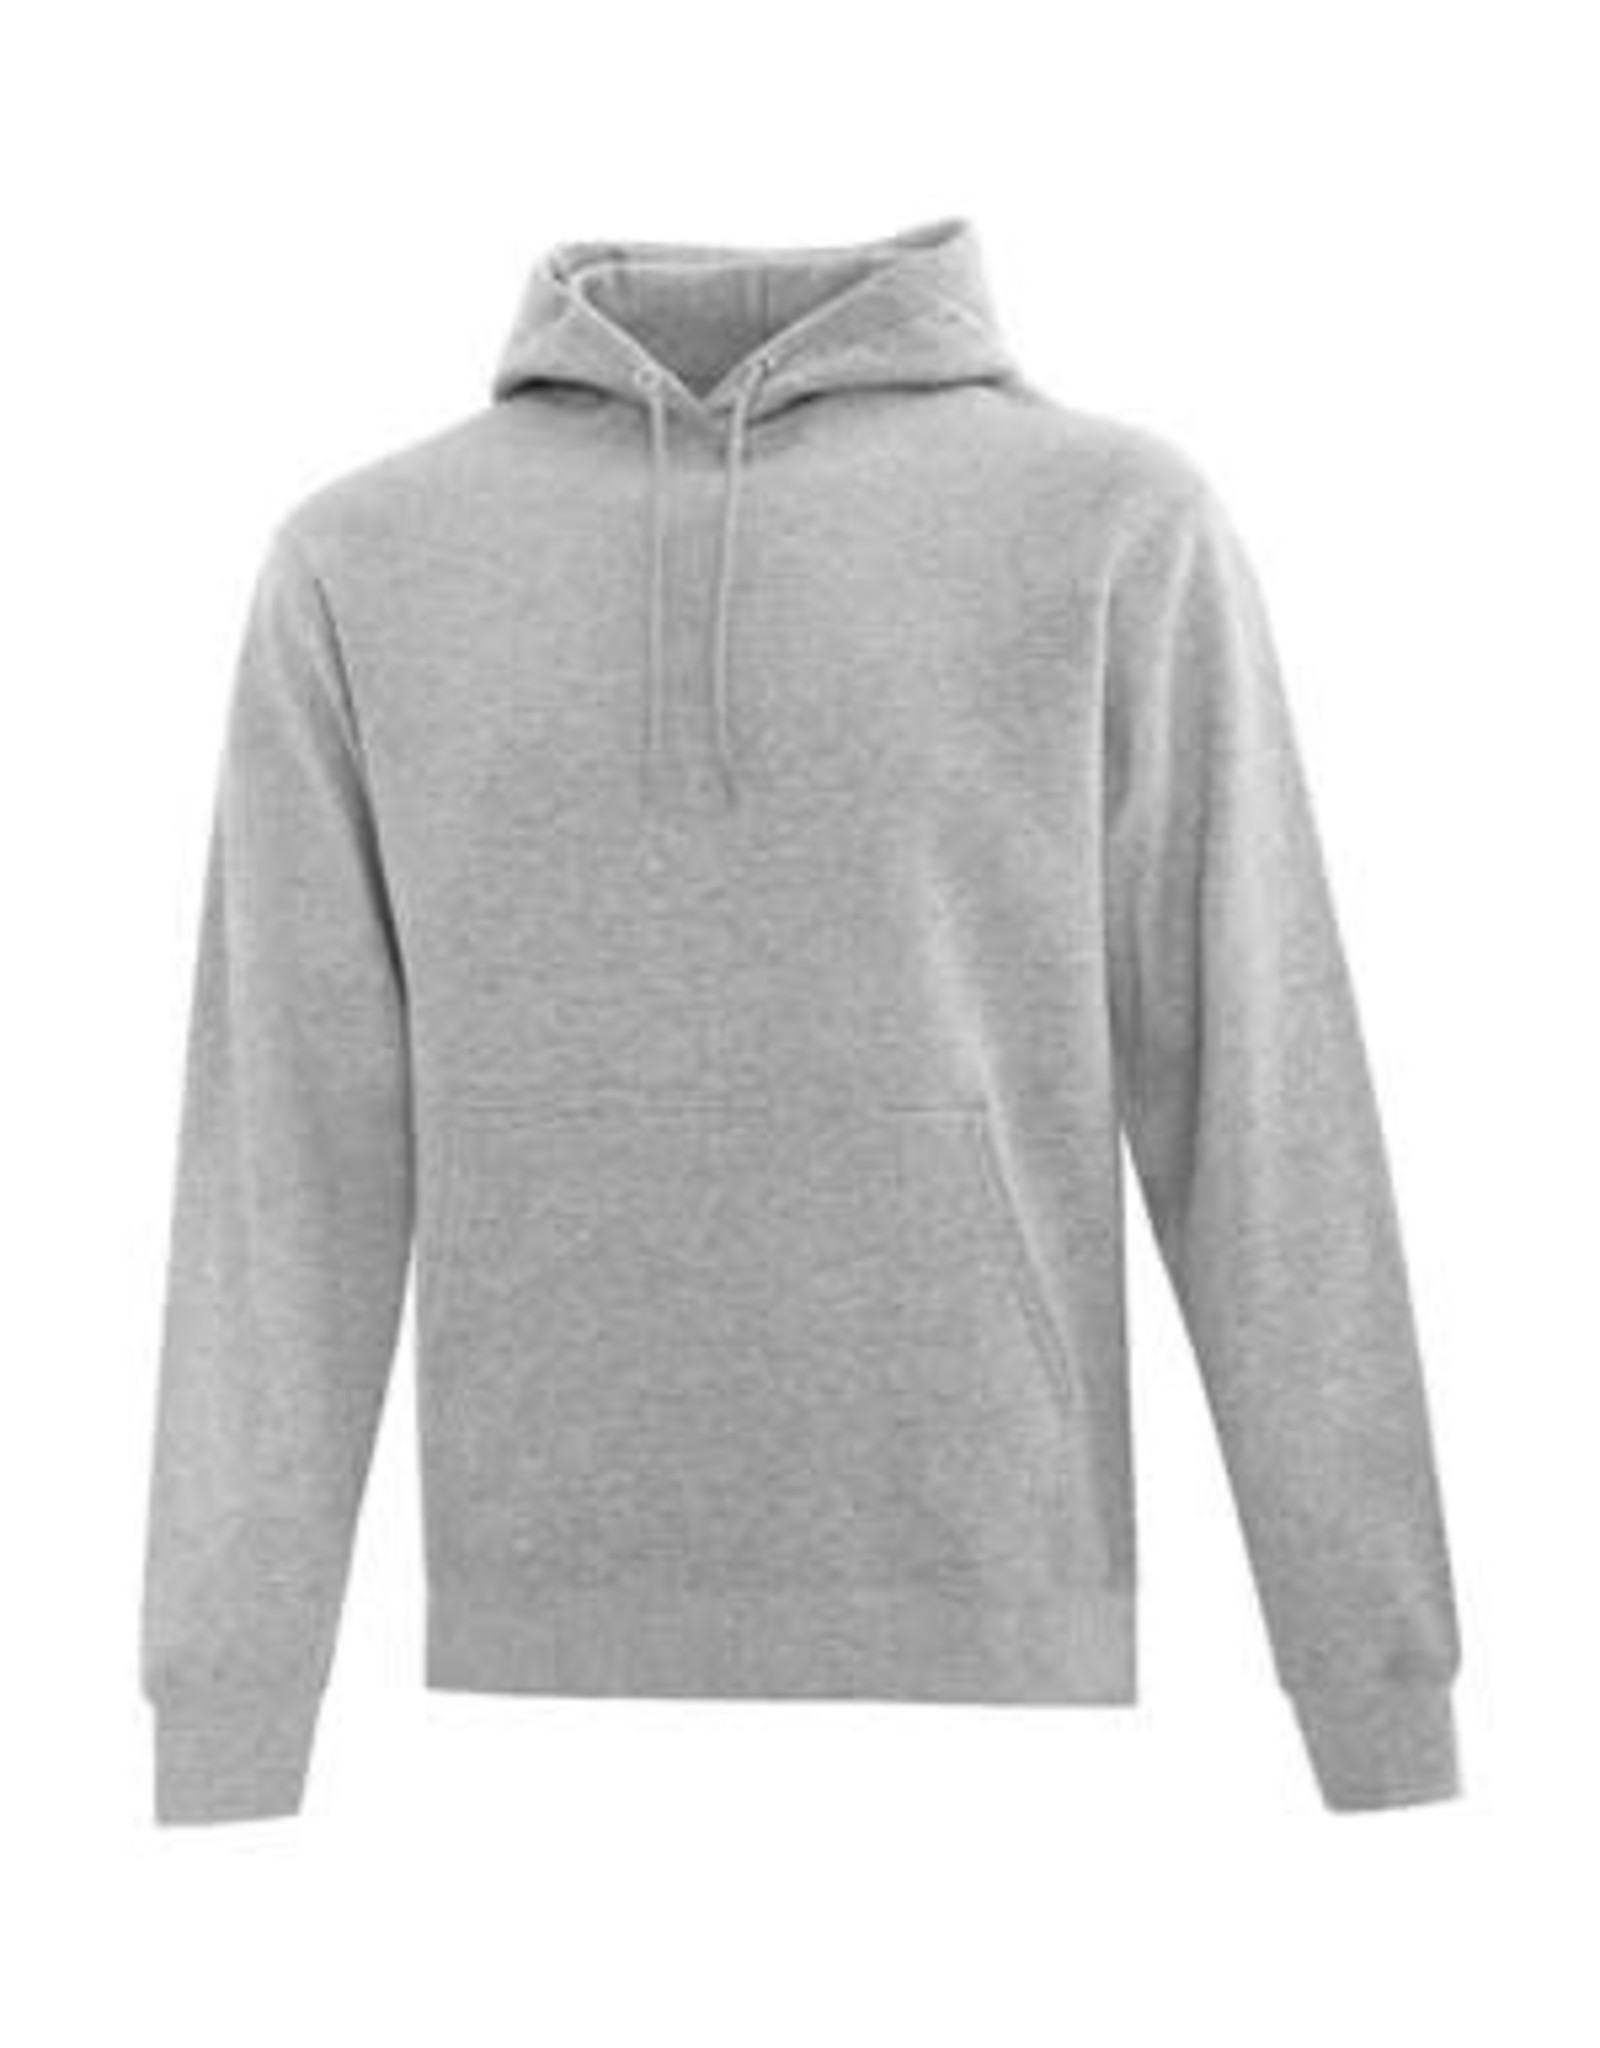 ATC F2500 Fleece Hoodie - Soles and Suits Athletic Apparel